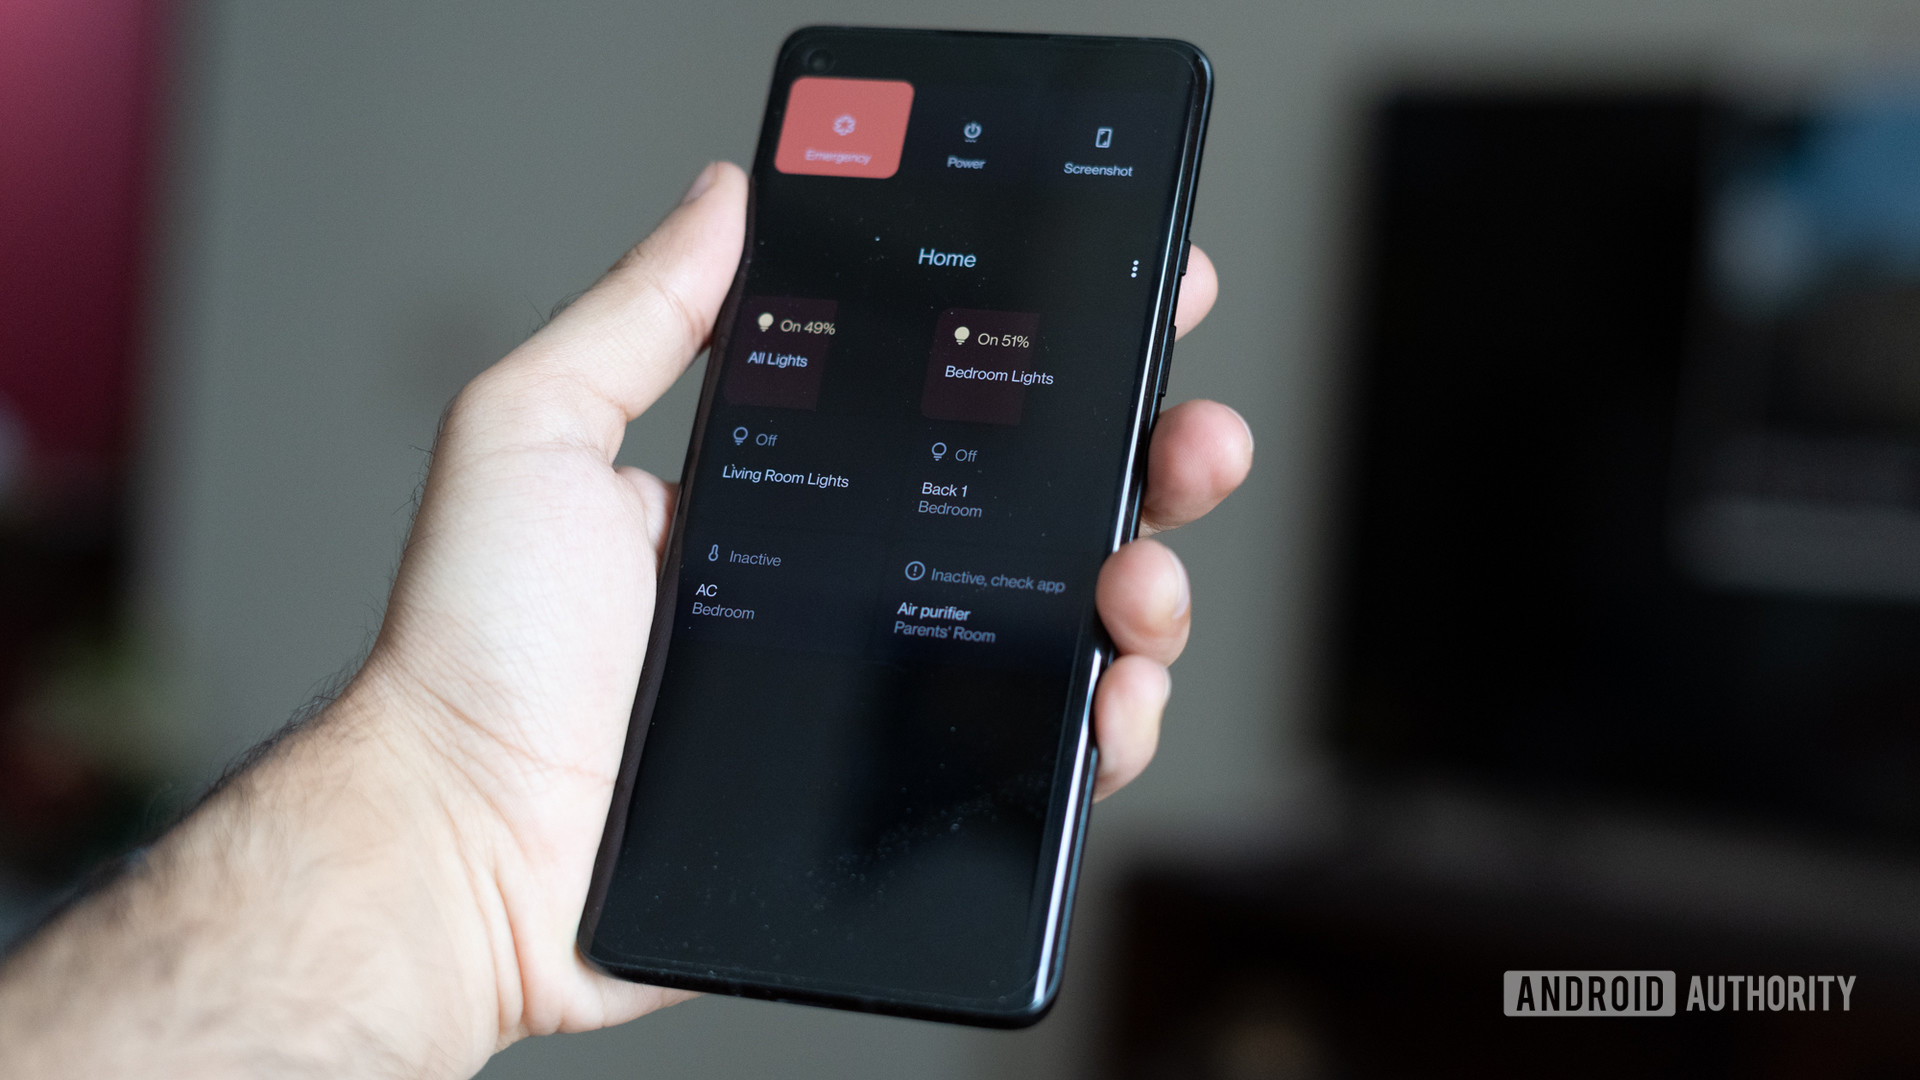 OnePlus Oxygen OS 11 Android 11 smarthome controls